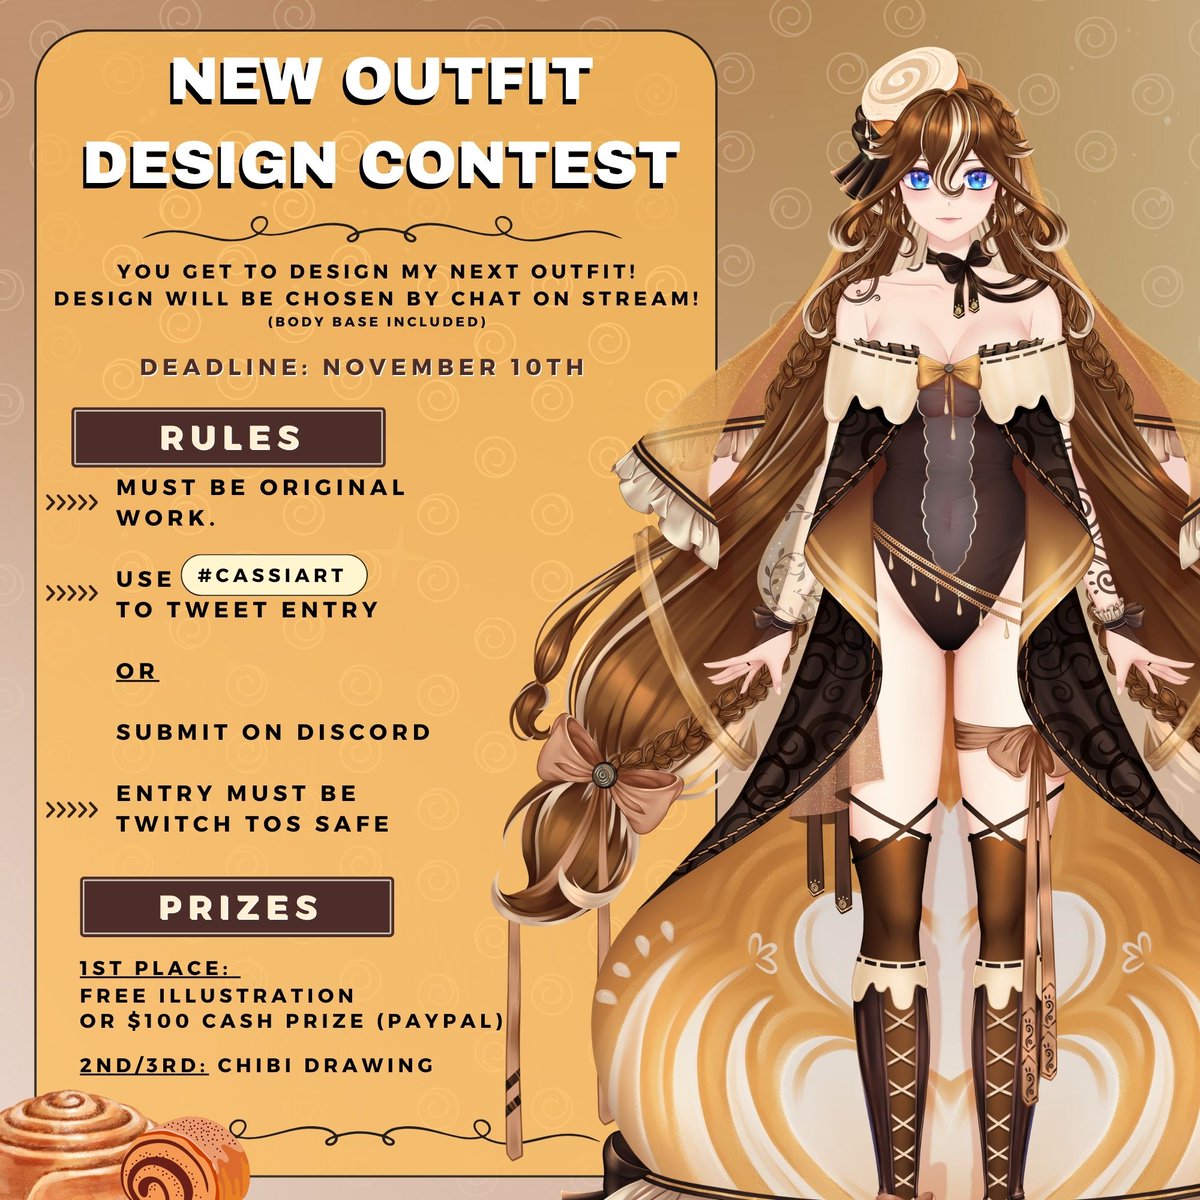 🧡 [ OUTFIT DESIGN CONTEST ] 🧡
As part of the subtember goal reached, I will be hosting a design contest!

-> All rules, how to submit, and prizes are in the picture below!

Can't wait to see your designs!

#Vtuber #envtuber #vtubersuprising